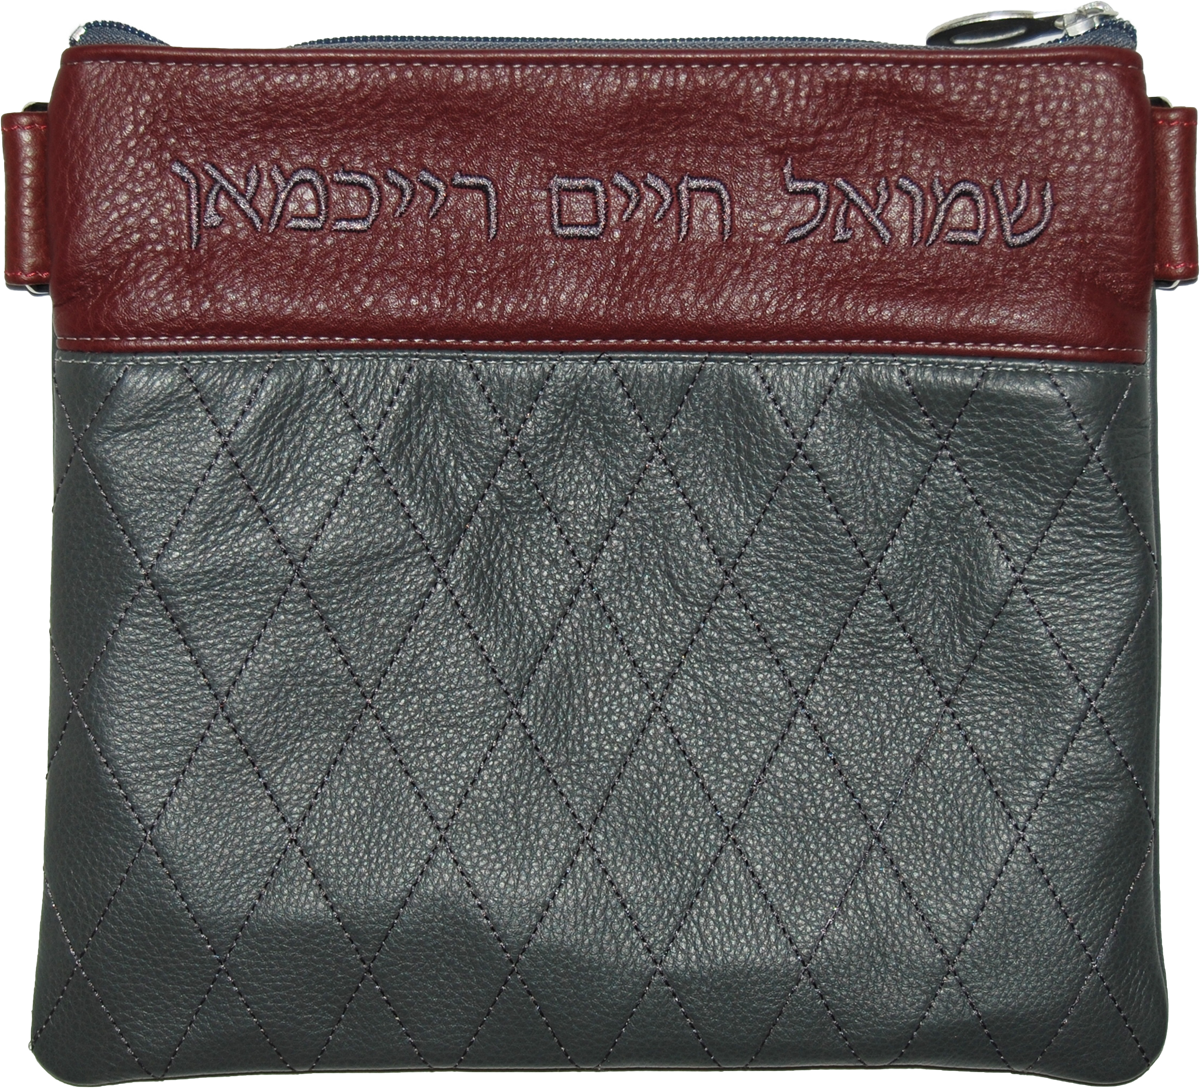 Charcoal embroidered diamonds on charcoal leather with burgundy top strip for name